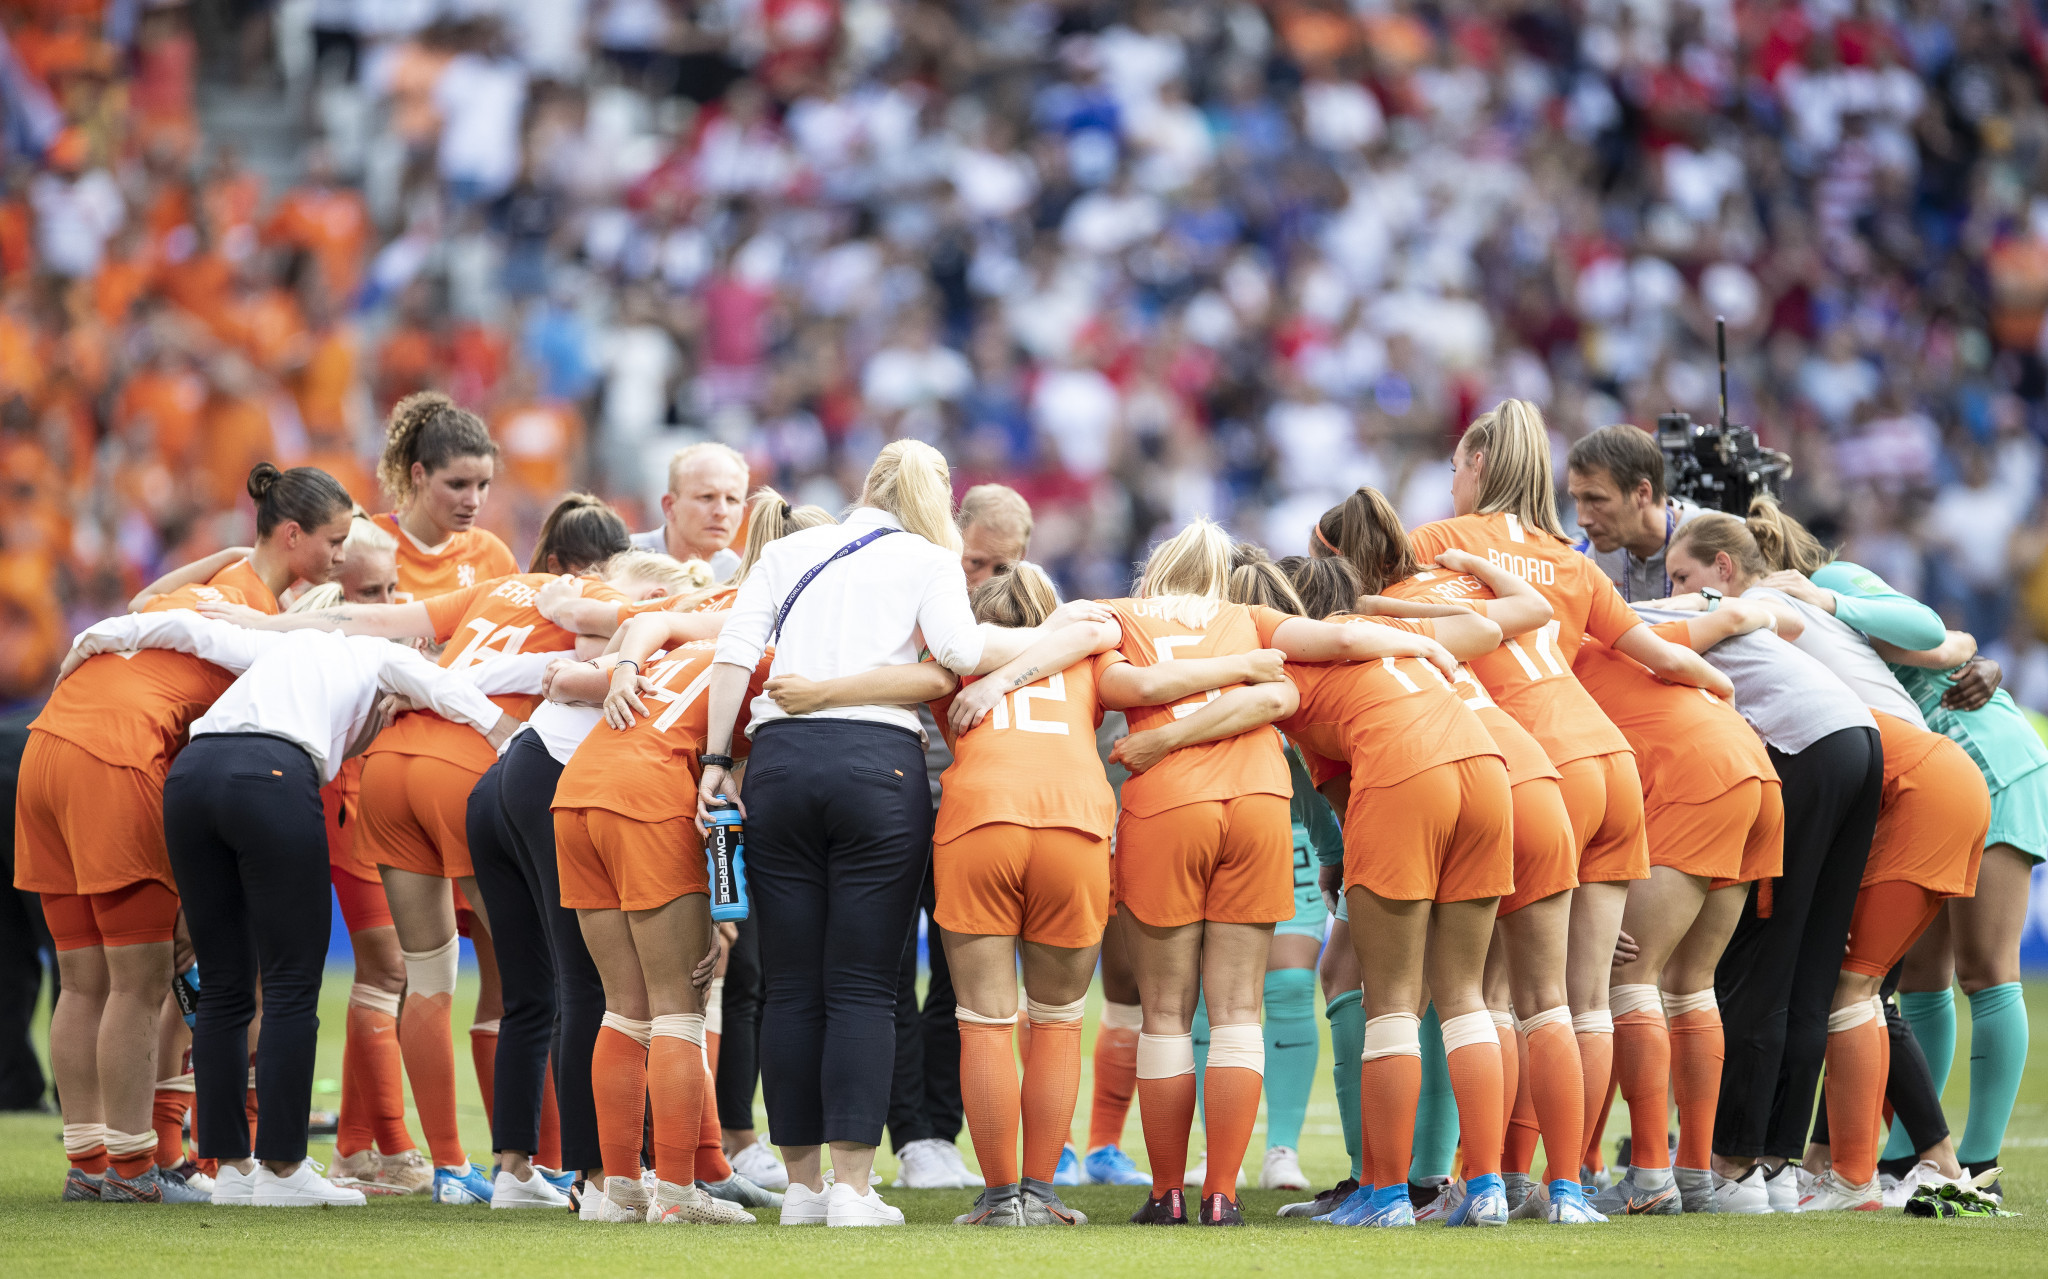 The Netherlands is set to team up with Germany and Belgium on a joint bid to co-host the 2023 Women's Football World Cup ©Getty Images